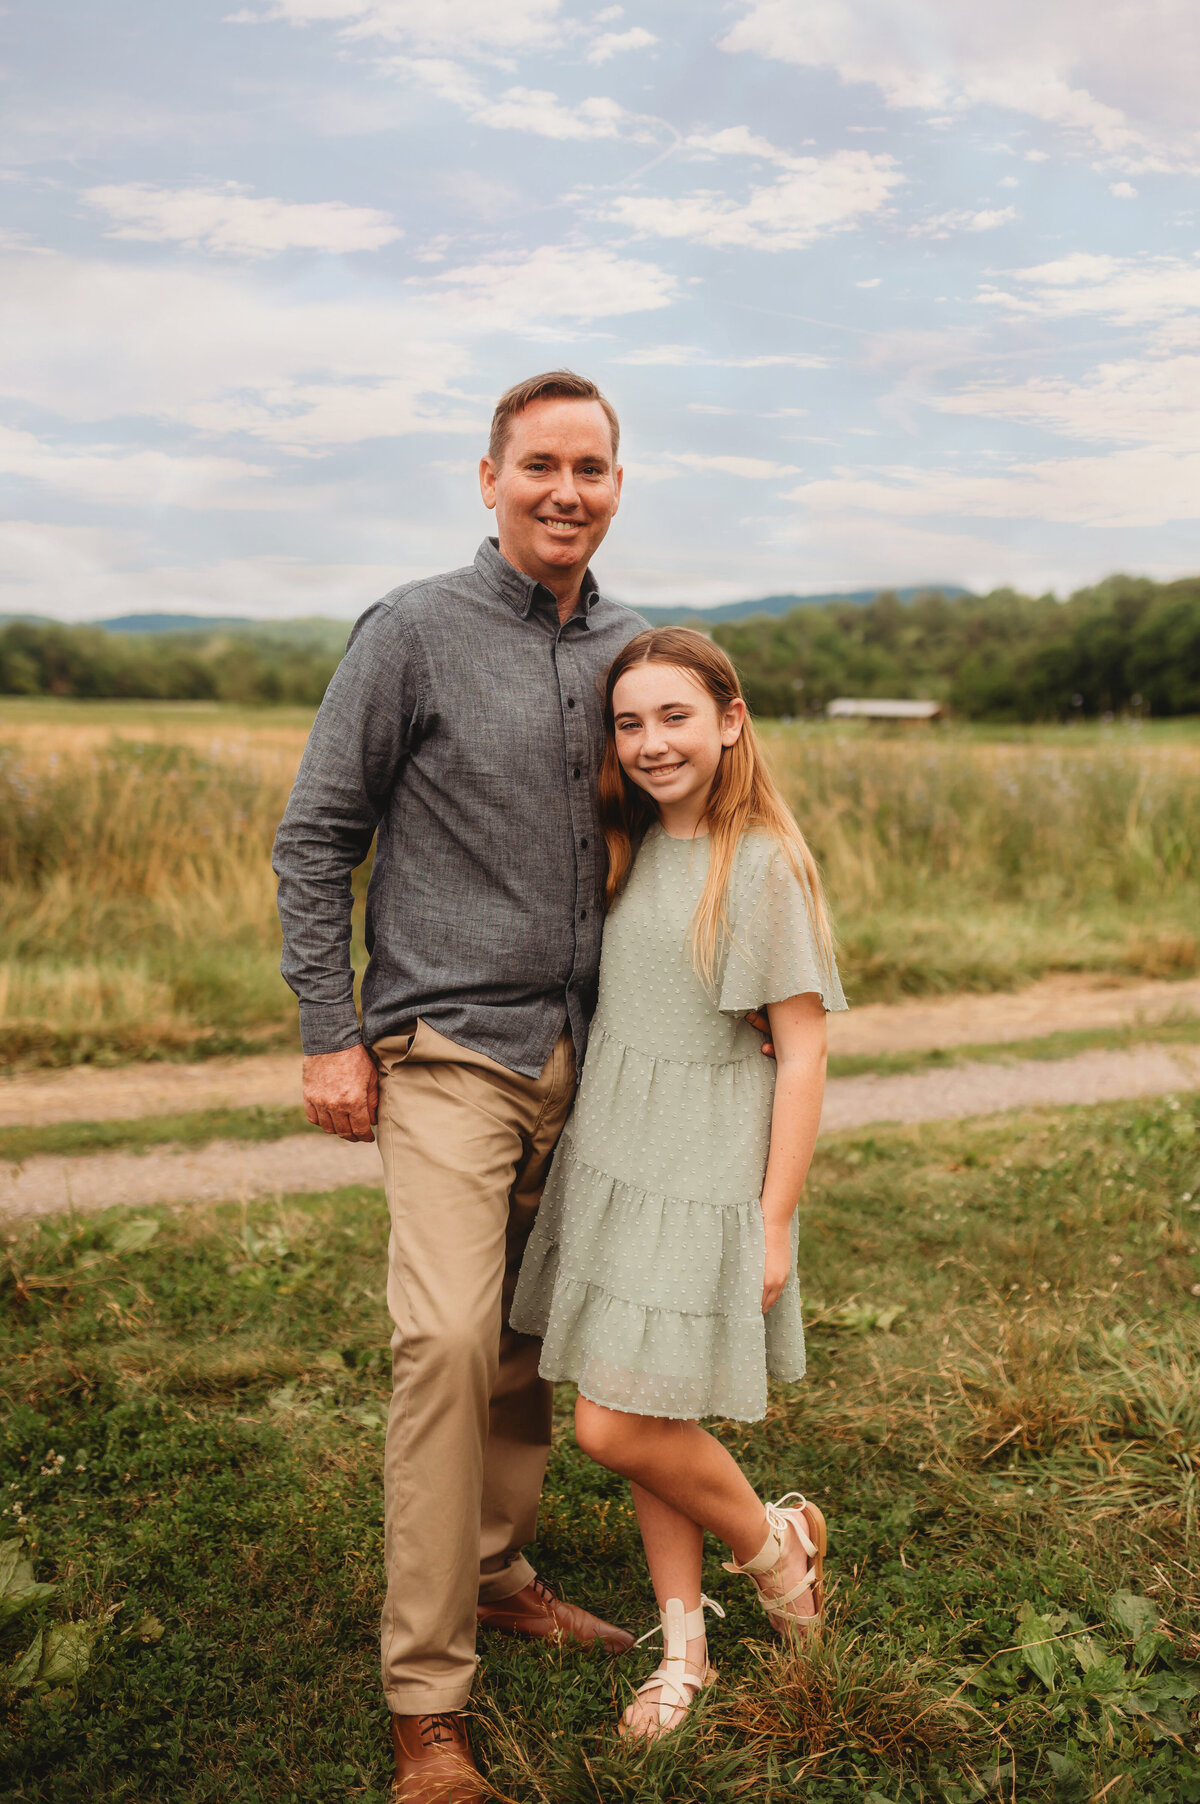 Father poses with his daughter for Portraits during an Extended Family Photoshoot in Asheville, NC.